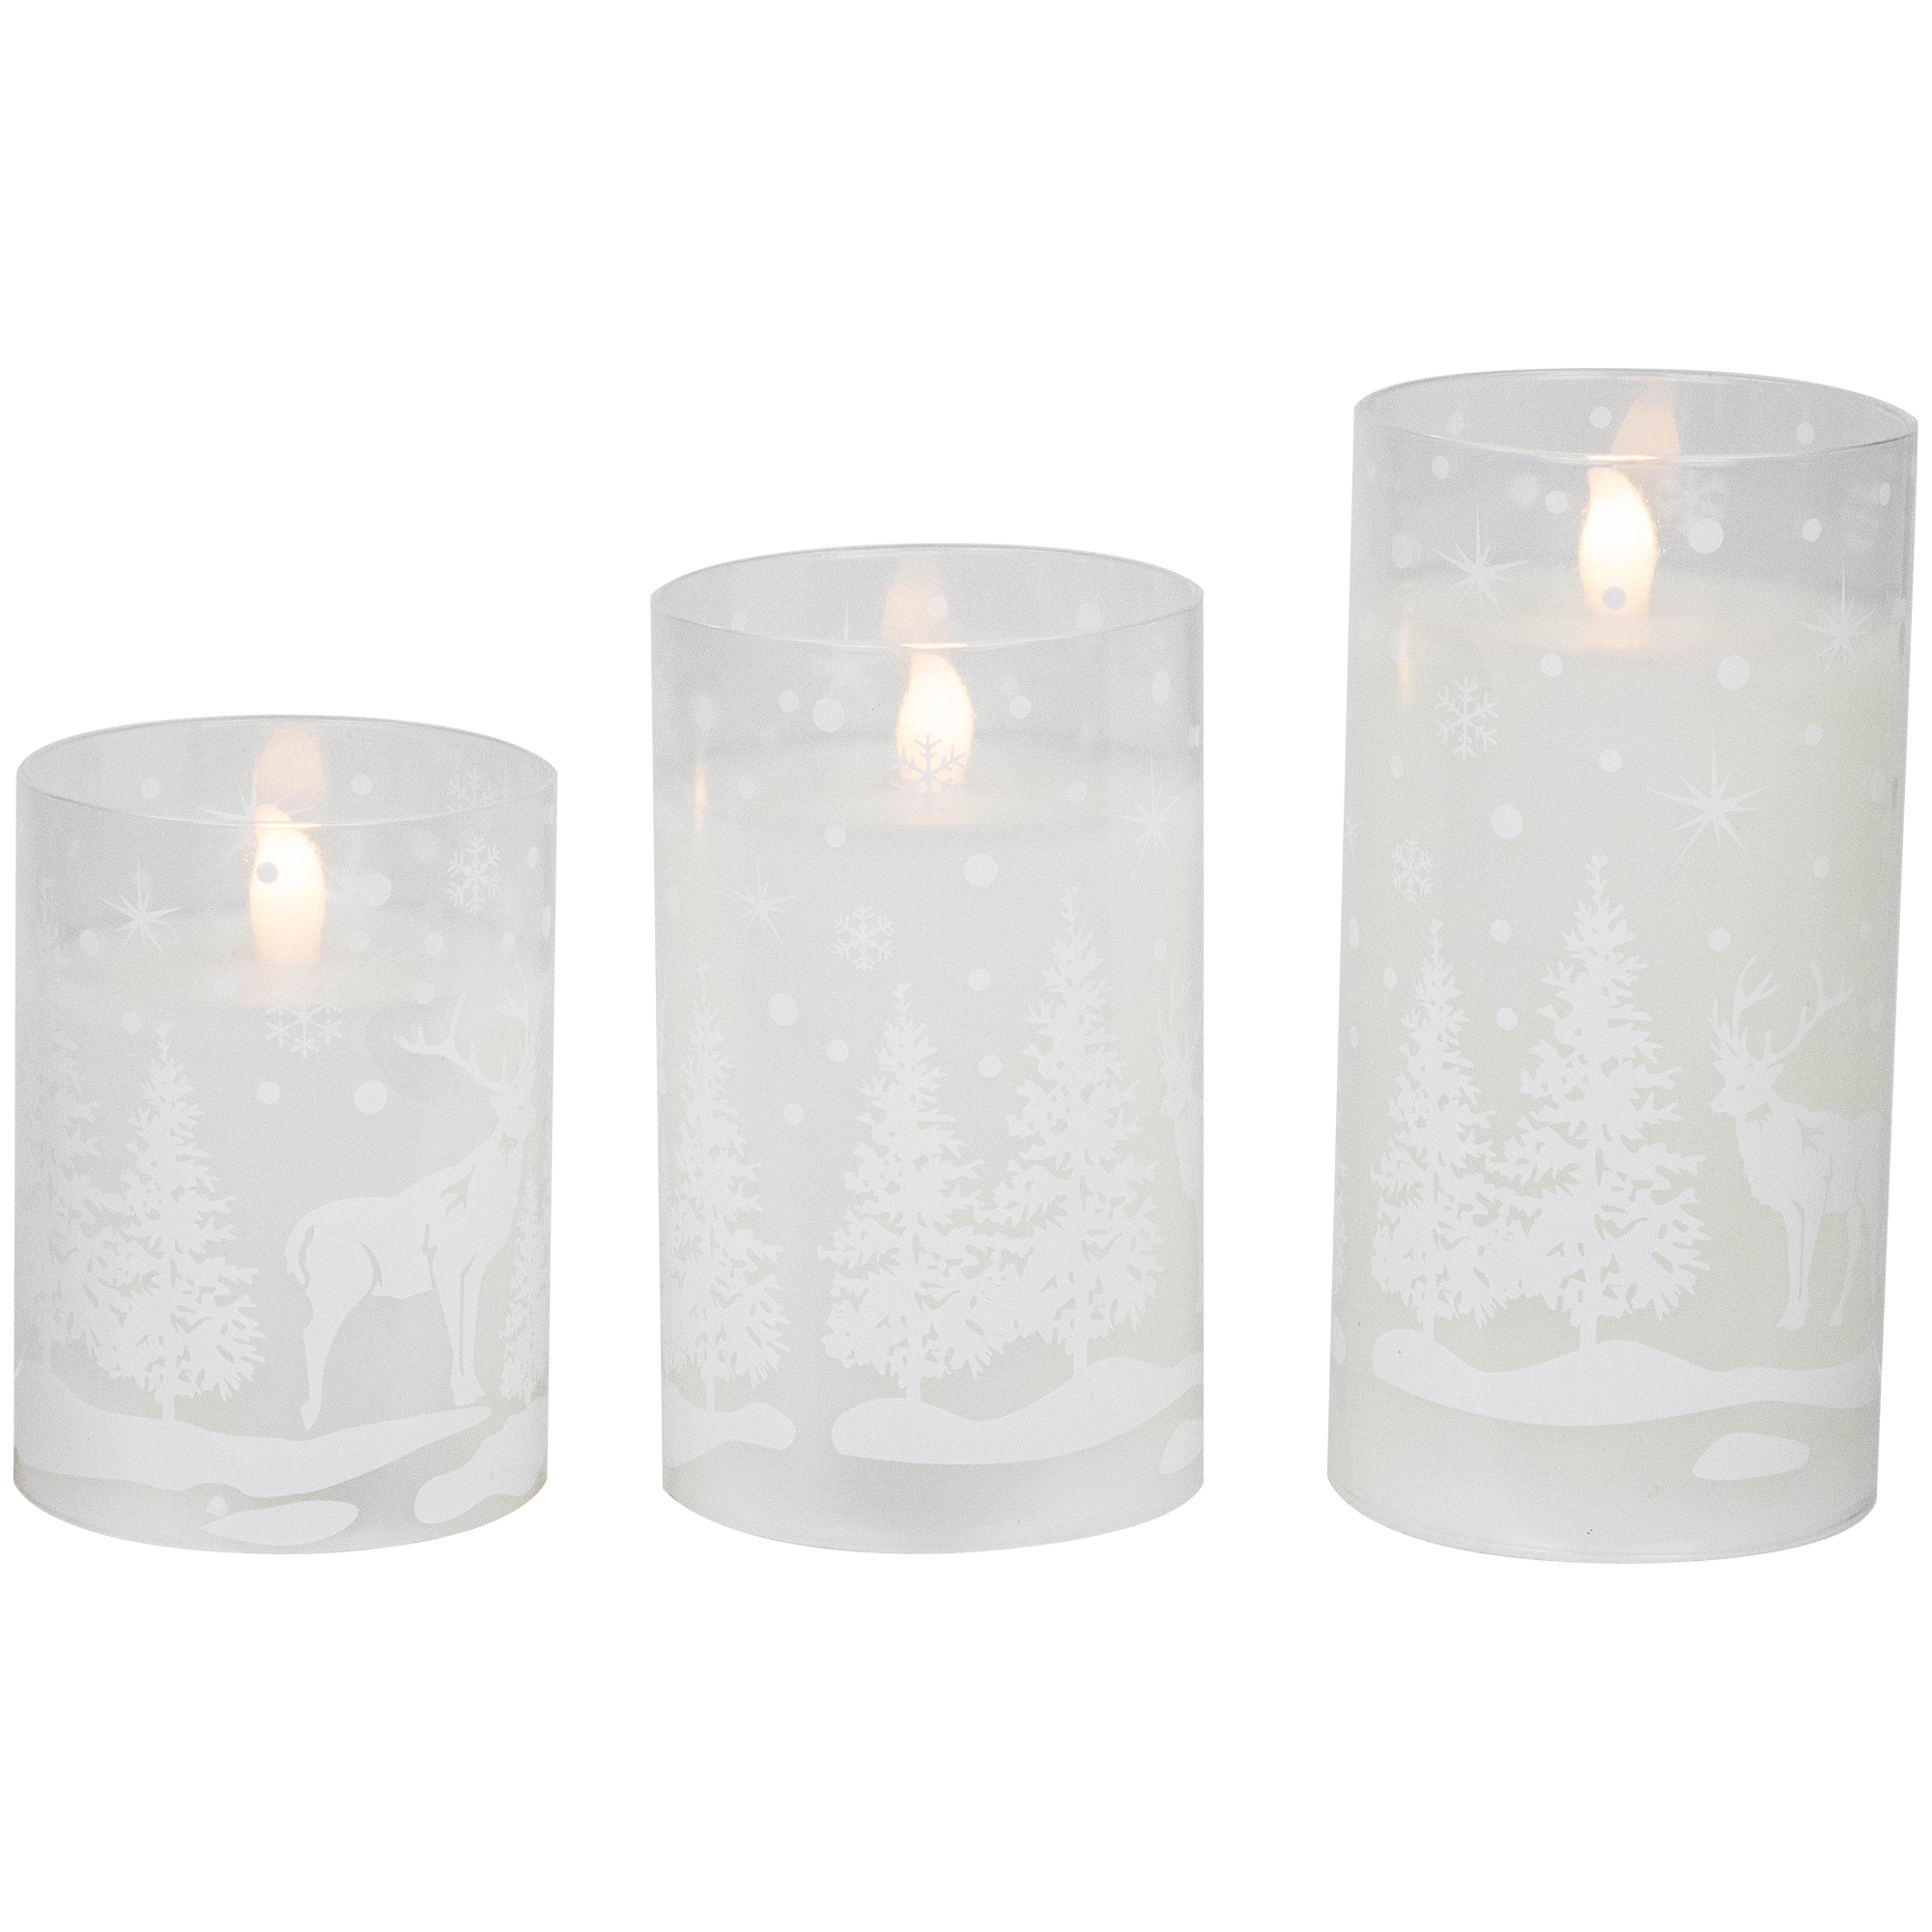 Glass Christmas Candles and Candle Holders - Bed Bath & Beyond